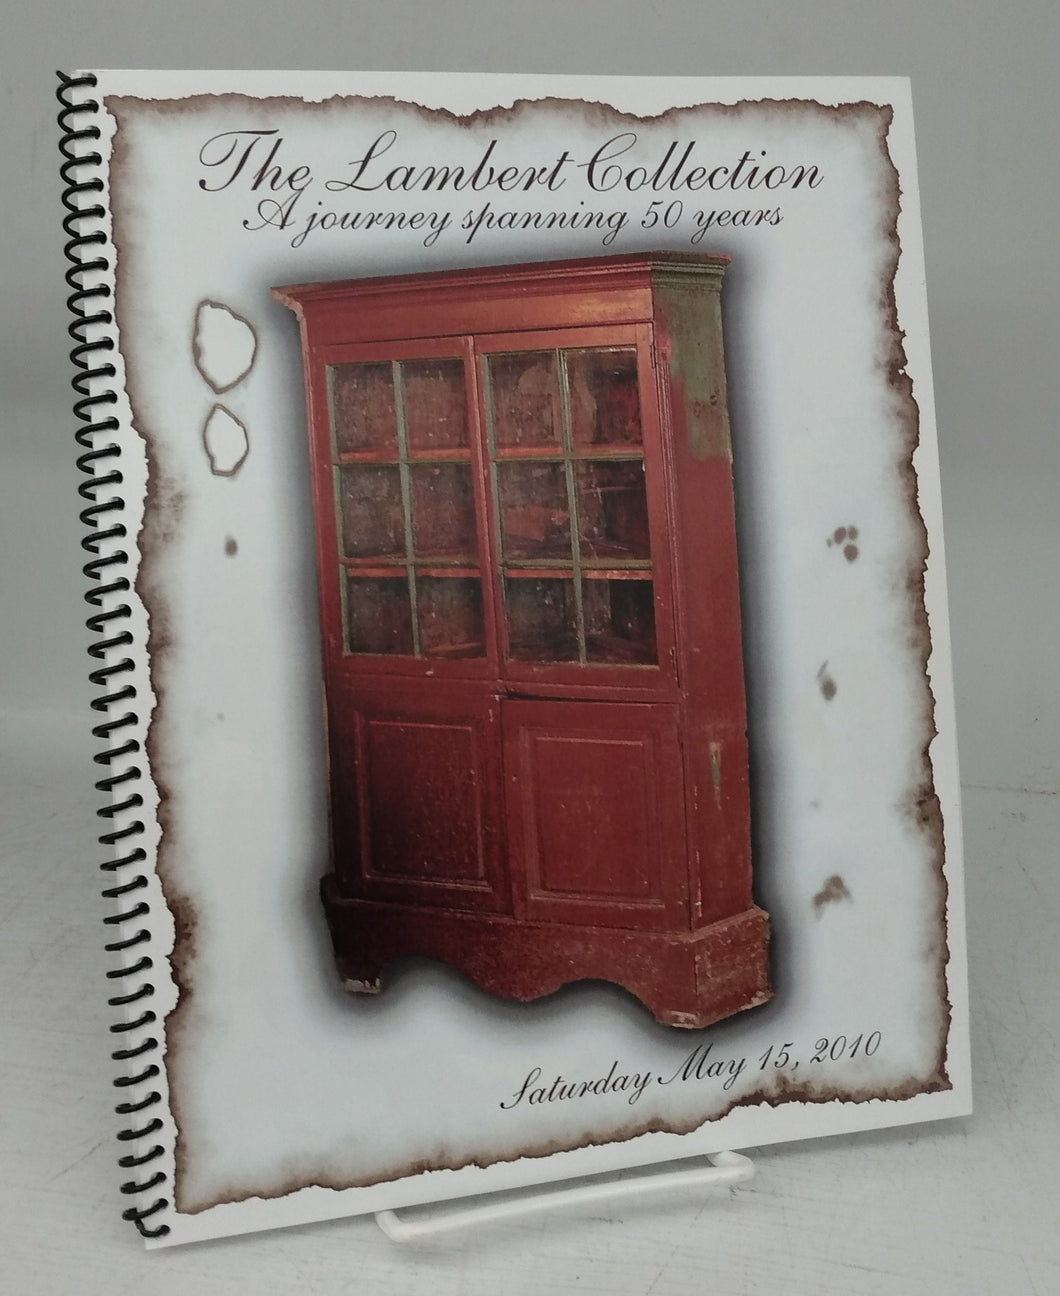 The Lambert Collection: A journey spanning 50 Years